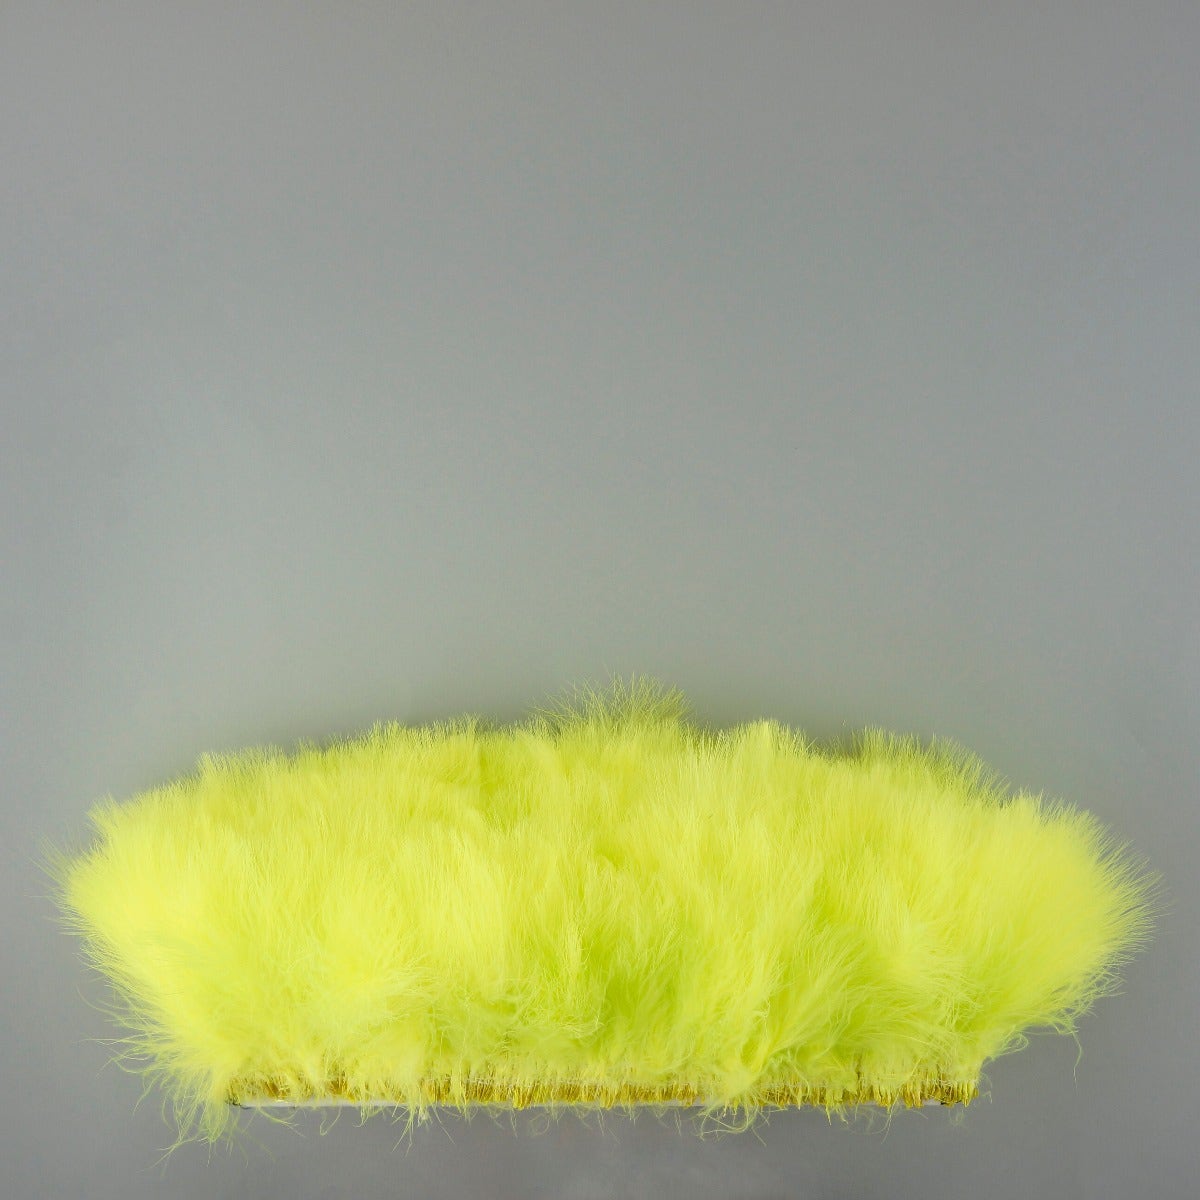 STRUNG TURKEY MARABOU BLOOD QUILL FEATHERS  4-5" - Fluorescent Chartreuse